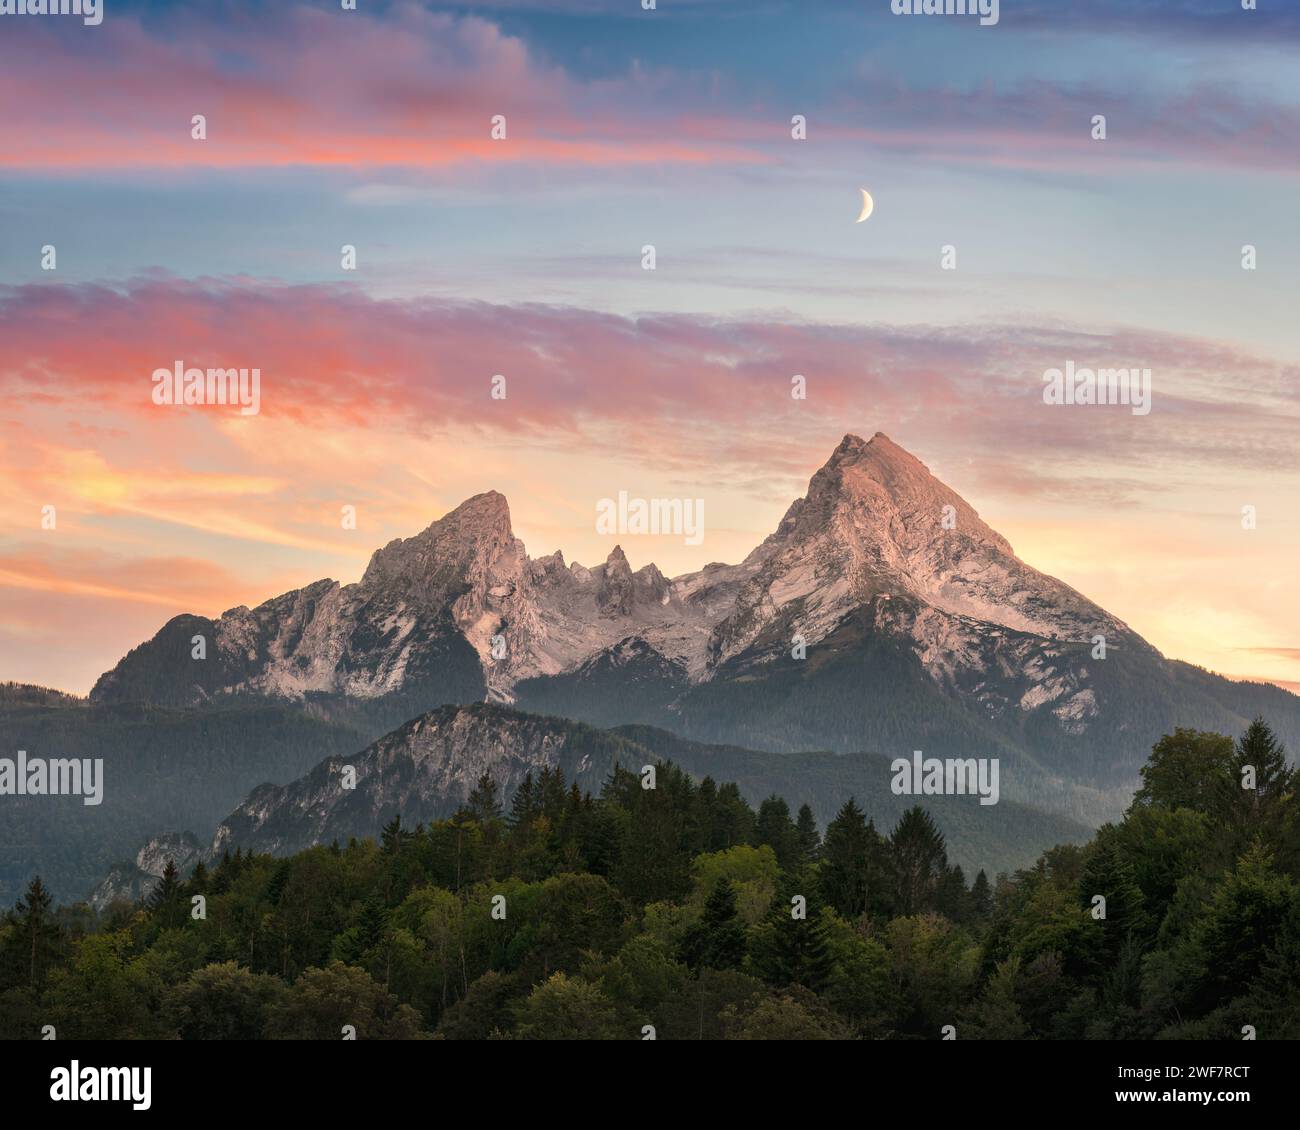 A majestic mountain formation, the Watzmann in Bavaria, Germany, with a colorful sunset sky and woodlands in the foreground Stock Photo